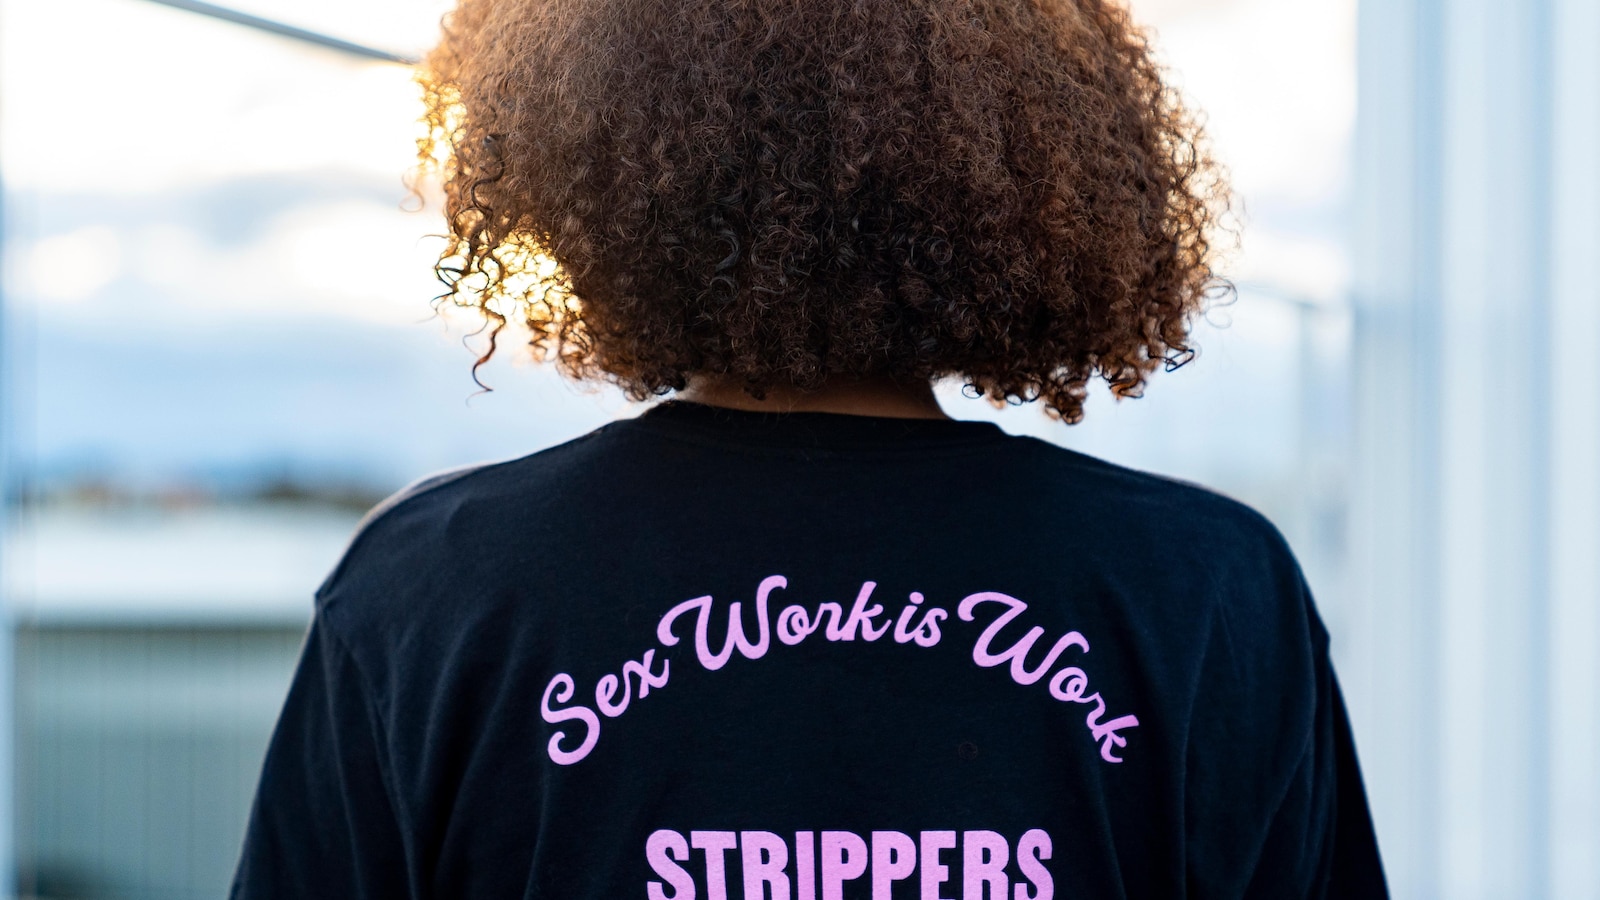 Washington State Passes Legislation Protecting Rights of Strippers